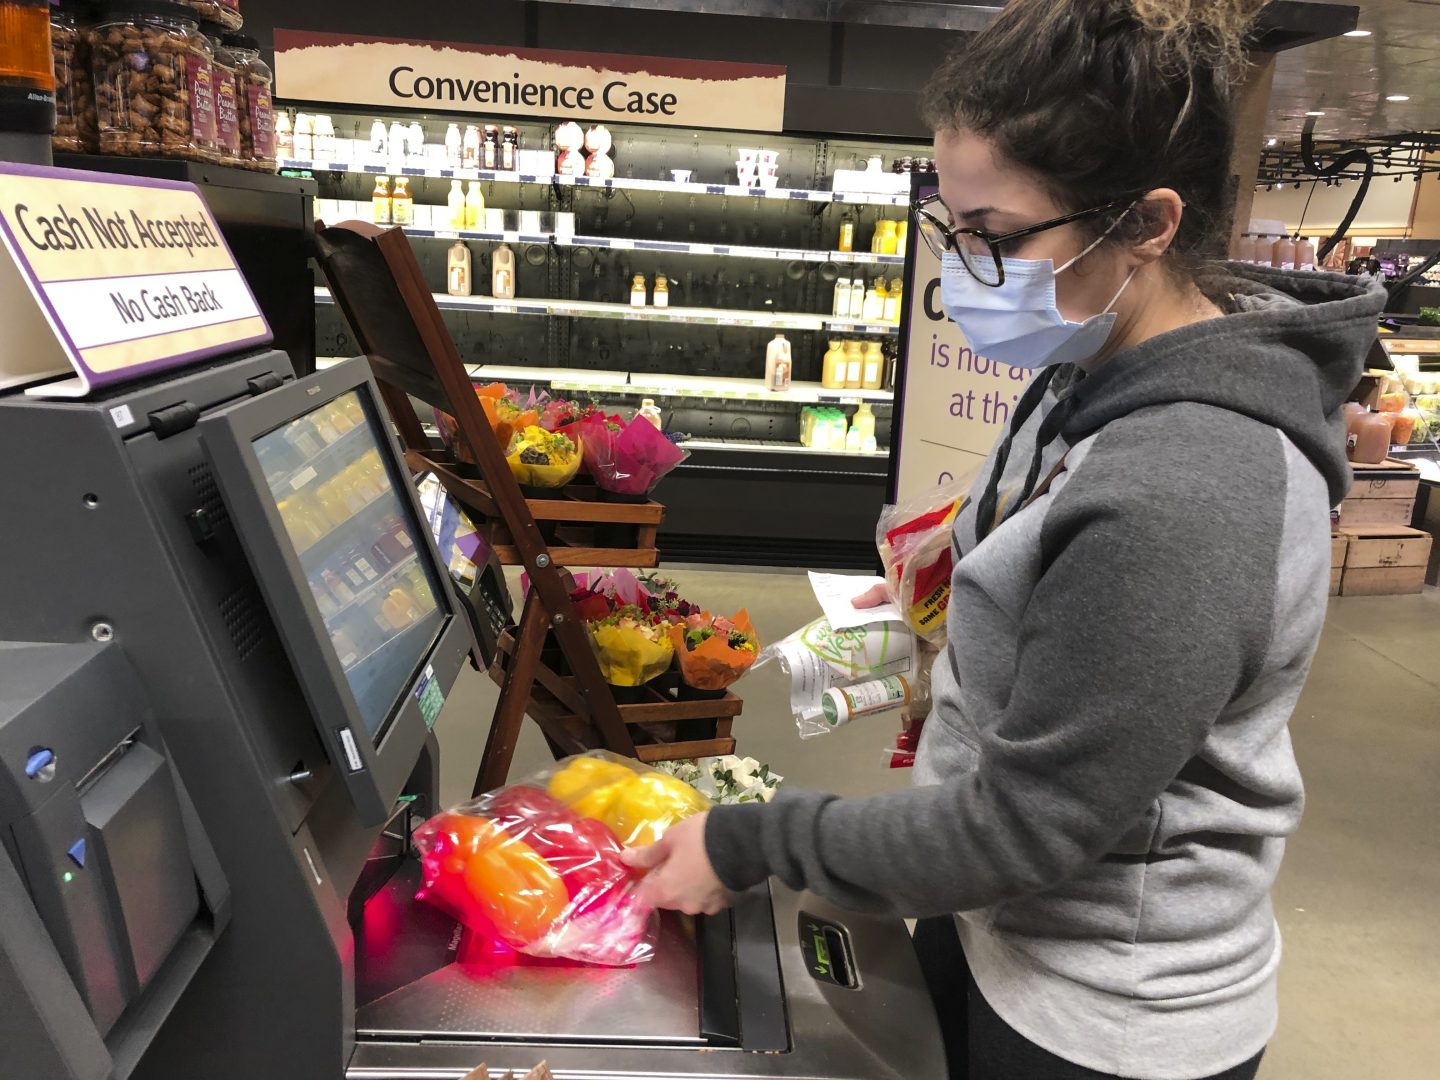 Wearing a surgical mask, Melissa Hall checks out of a Wegmans supermarket, Friday, March 13, 2020 in King of Prussia, Pa.,  Gov. Tom Wolf ordered schools, community centers, gyms and other venues in Montgomery County, a Philadelphia suburb, to shut down for two weeks amid a concentration of novel coronavirus cases there. (AP Photo/Michael Rubinkam)